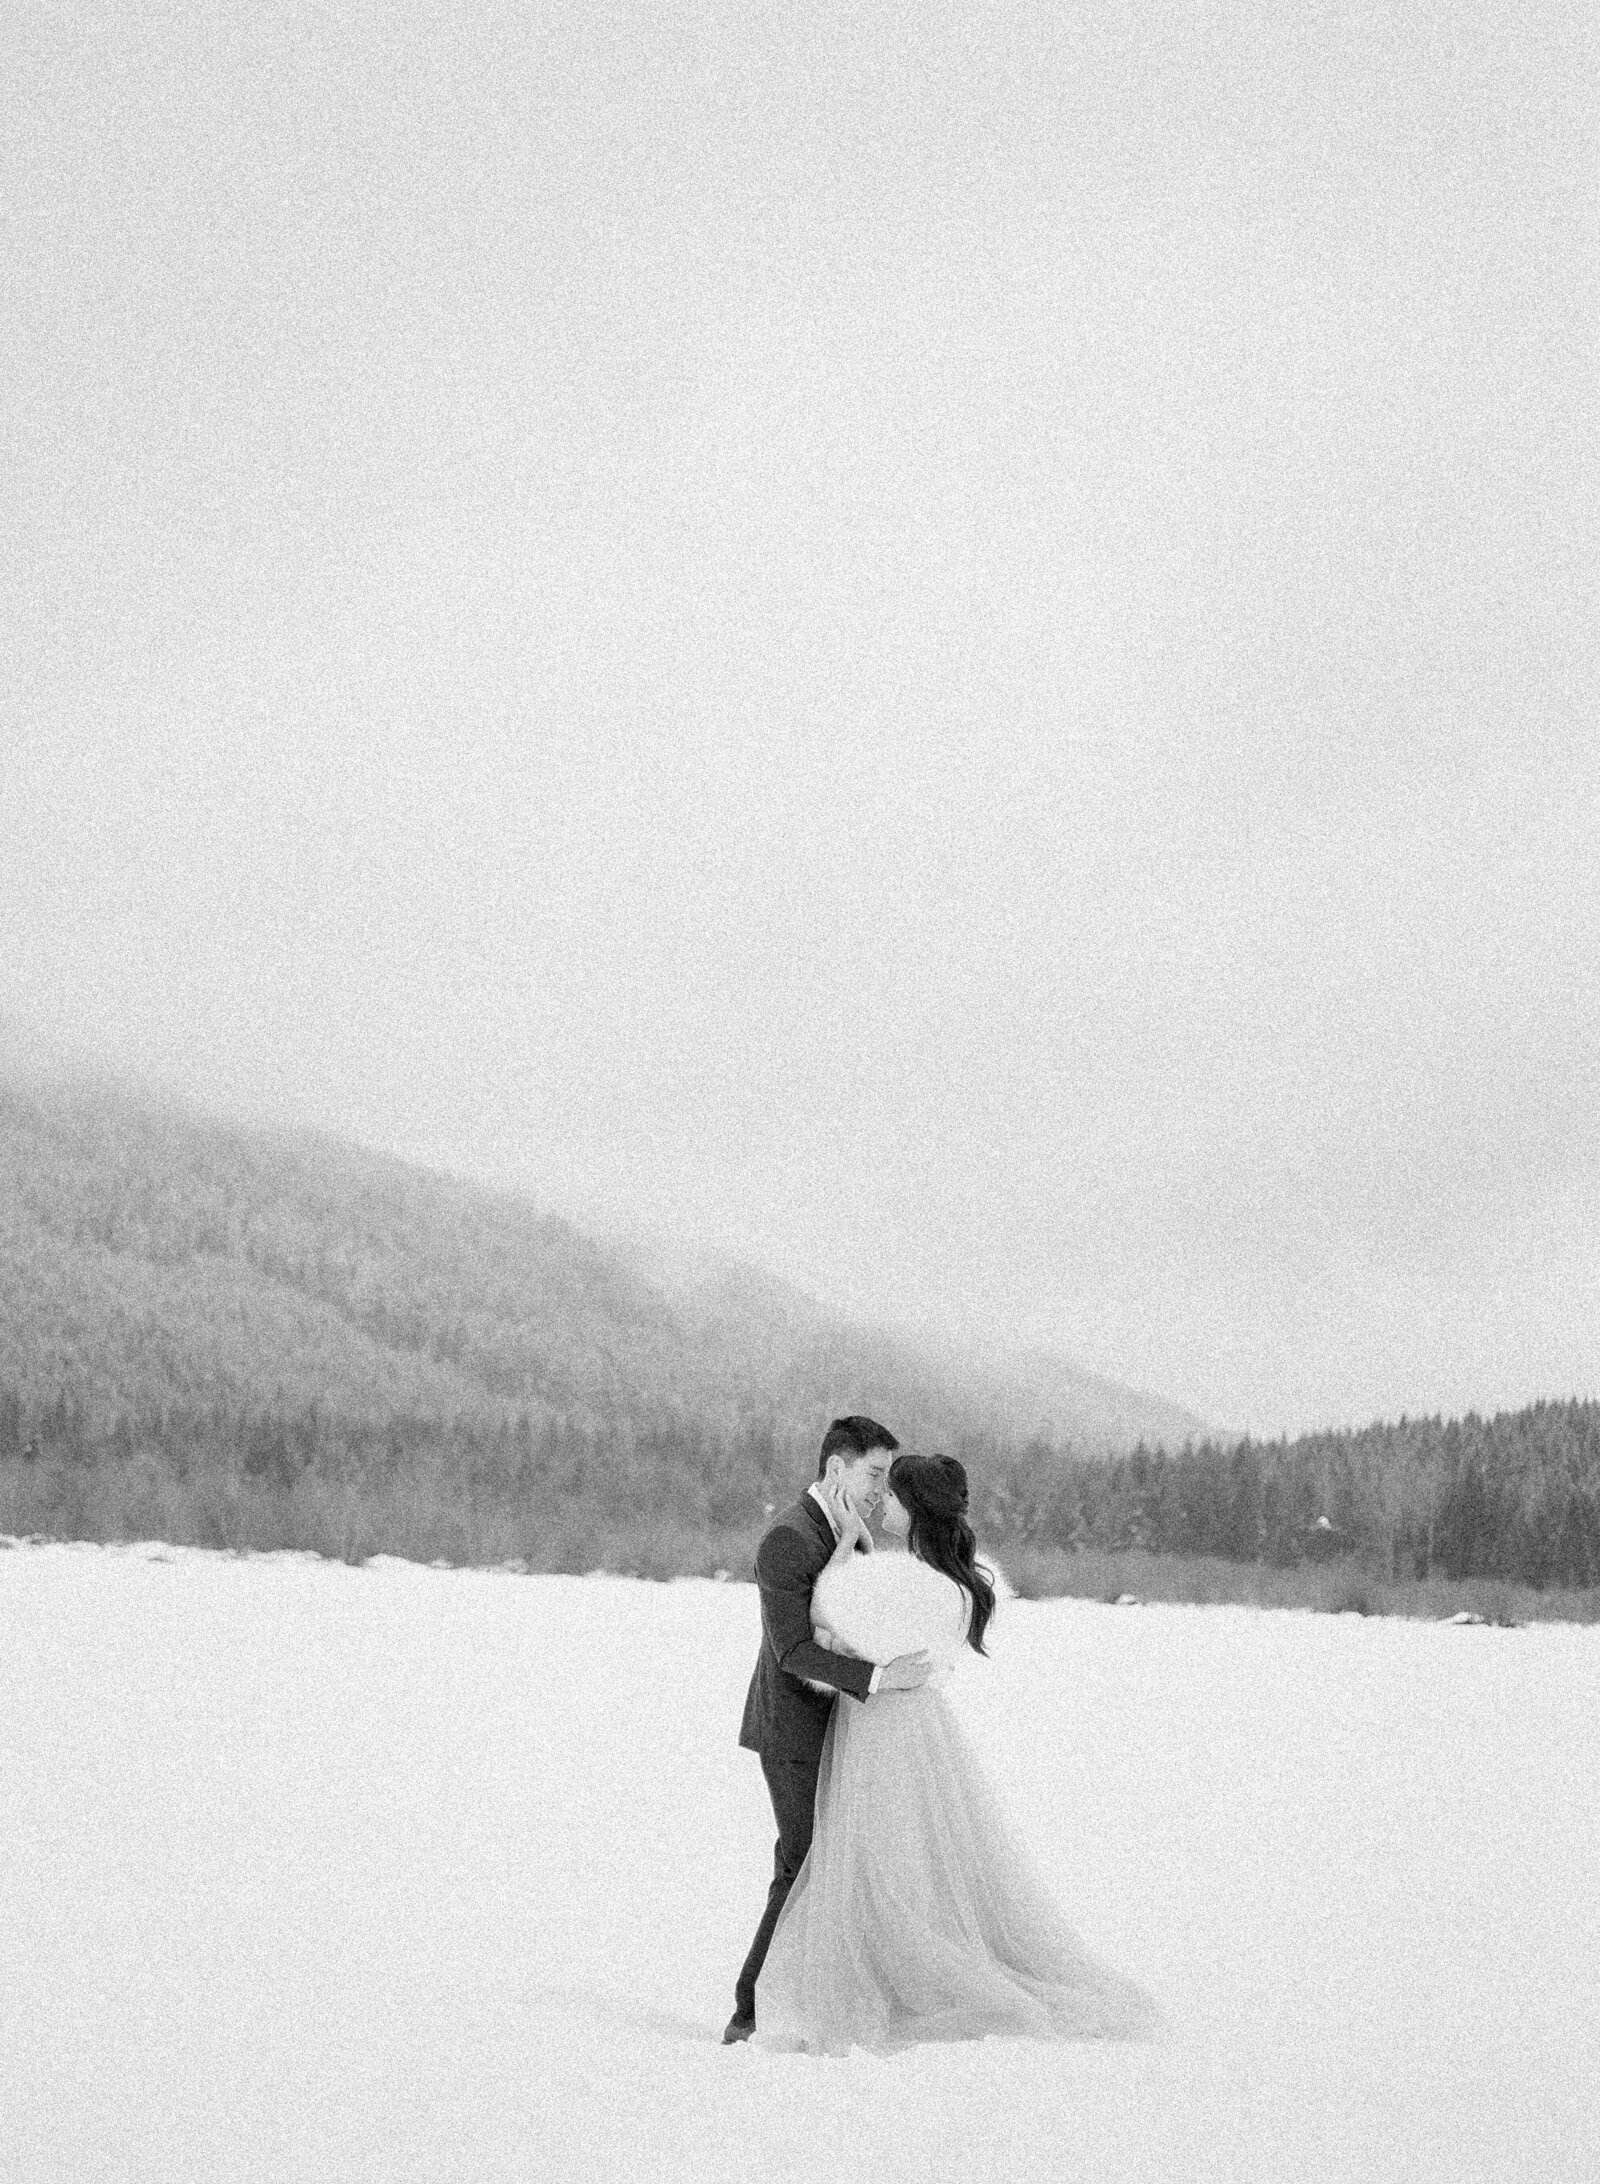 Annie and James Winter Session at Snoqualmie Pass - Kerry Jeanne Photography (153 of 178)